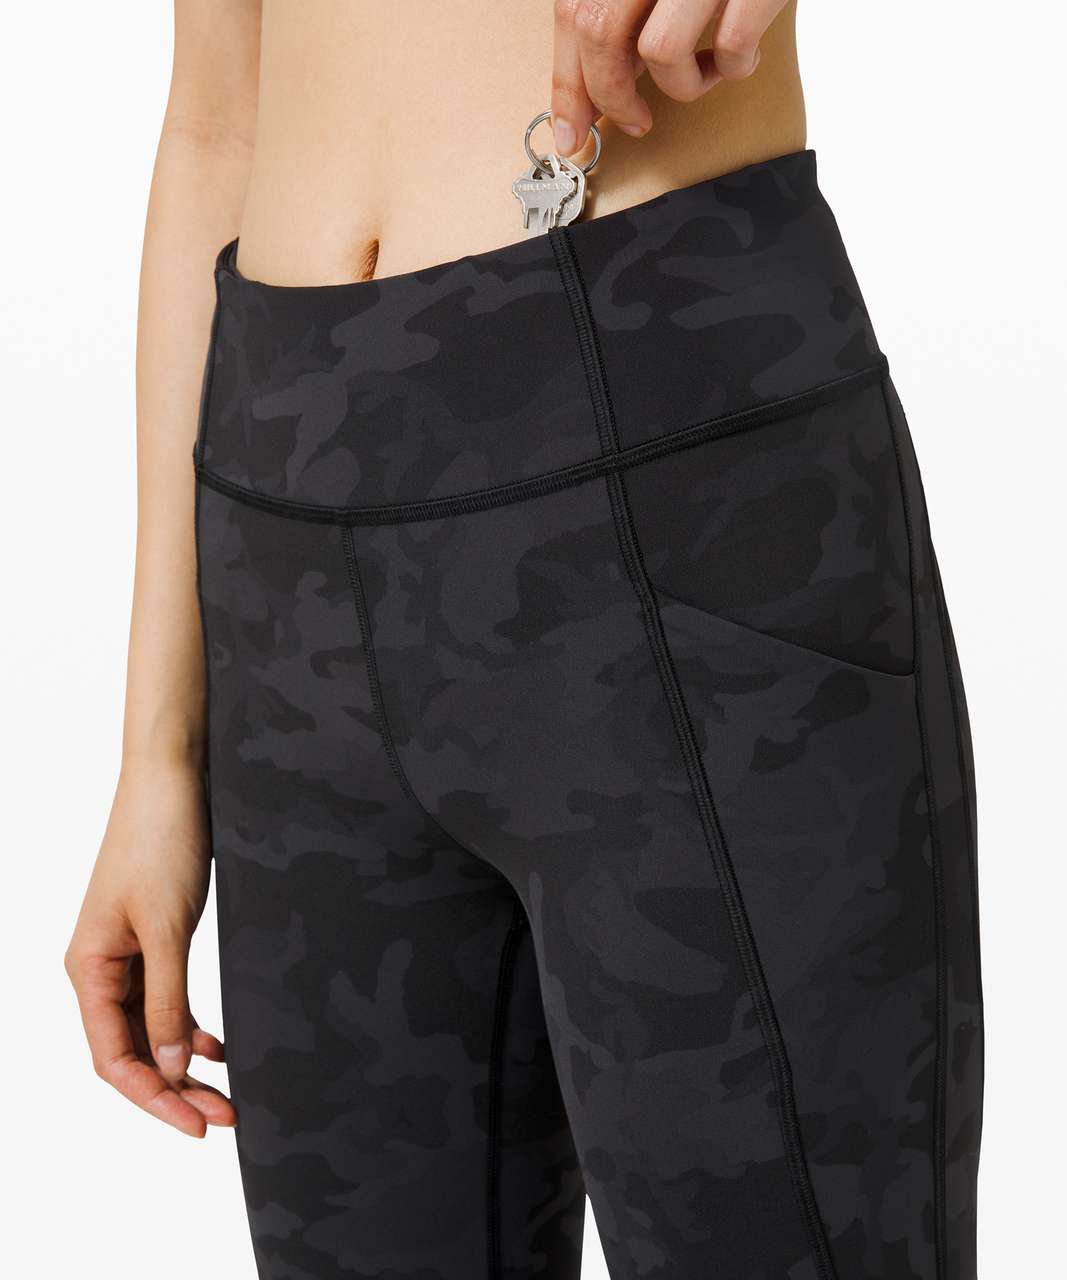 Lululemon Time To Sweat Crop 23" - Incognito Camo Multi Grey